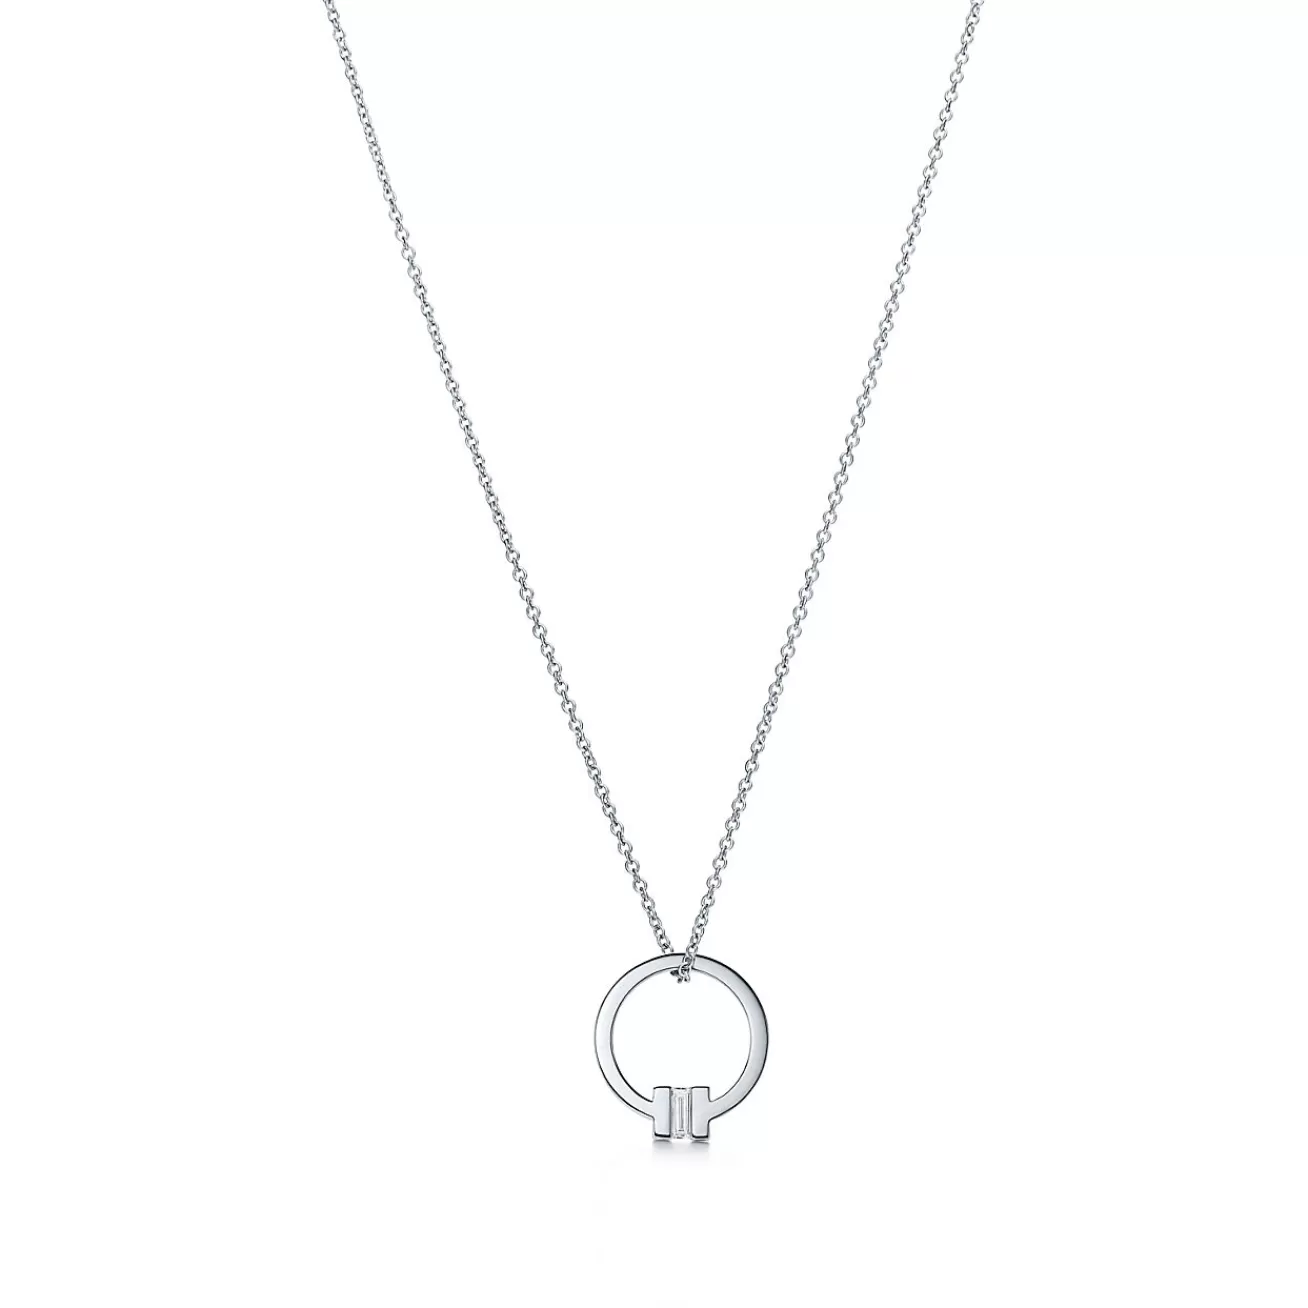 Tiffany & Co. Tiffany T pendant in 18k white gold with a baguette diamond. | ^ Necklaces & Pendants | Men's Jewelry